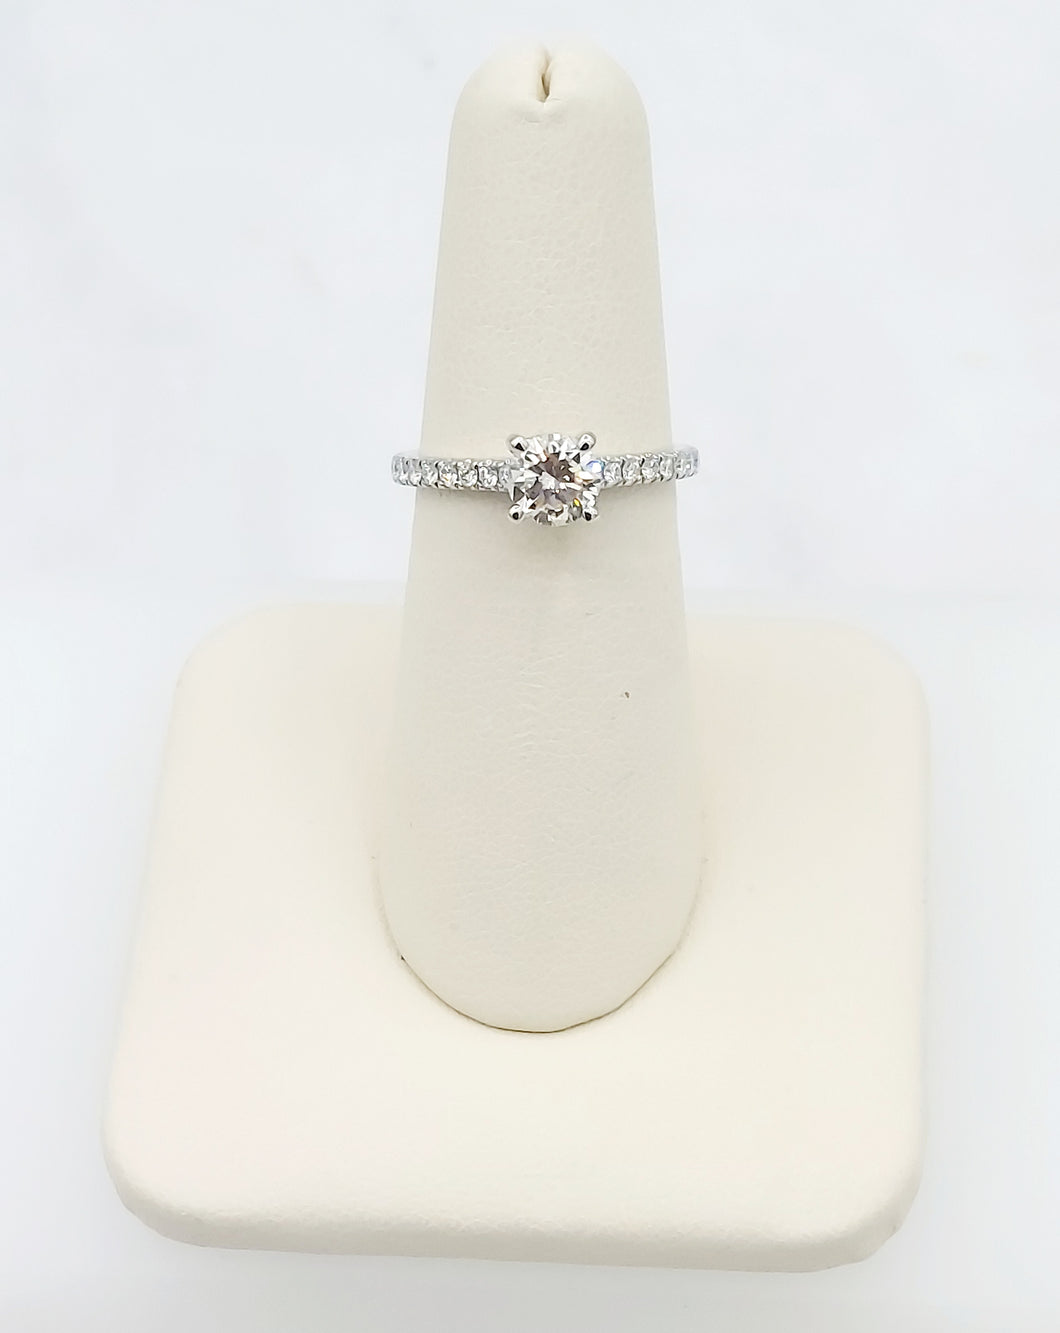 14K White Gold Brilliant Round Engagement Ring with Diamonds on the Band and Hiden Diamond Halo